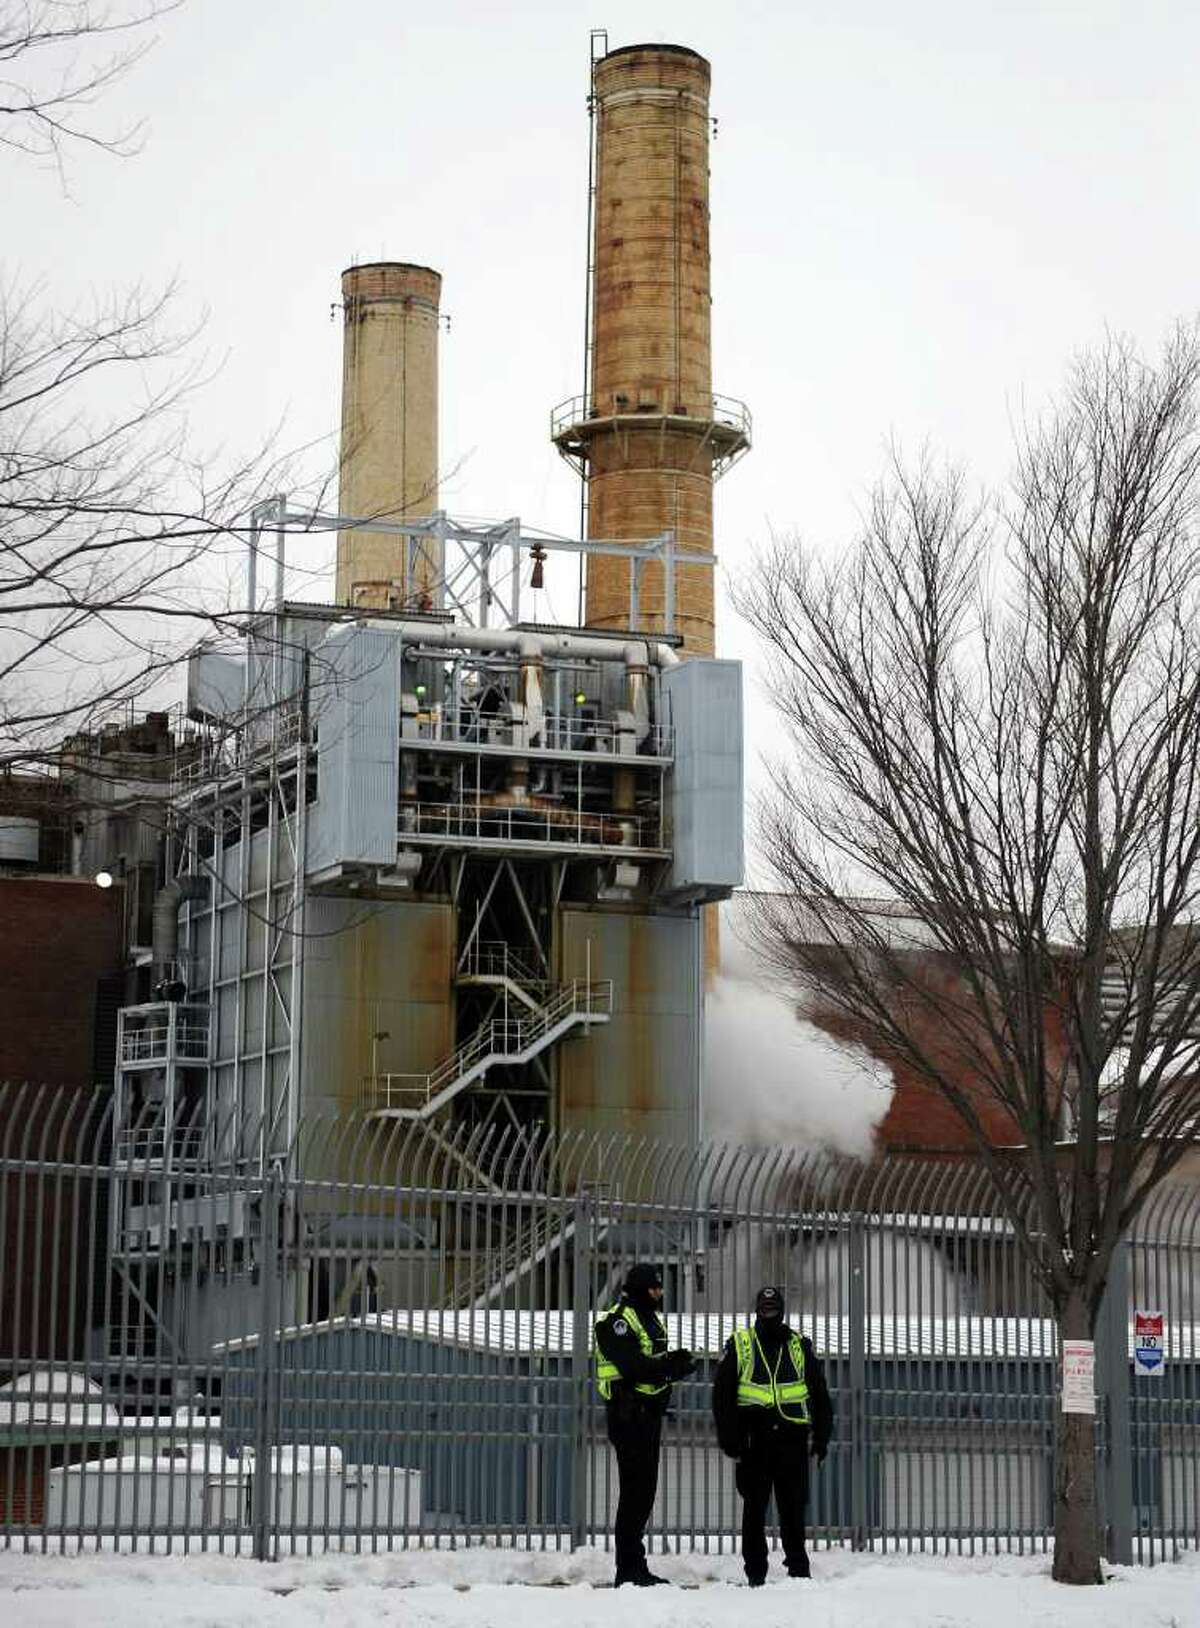 The Capitol Power Plant on March 2, 2009 in Washington, DC. TIM SLOAN/AFP/Getty Images